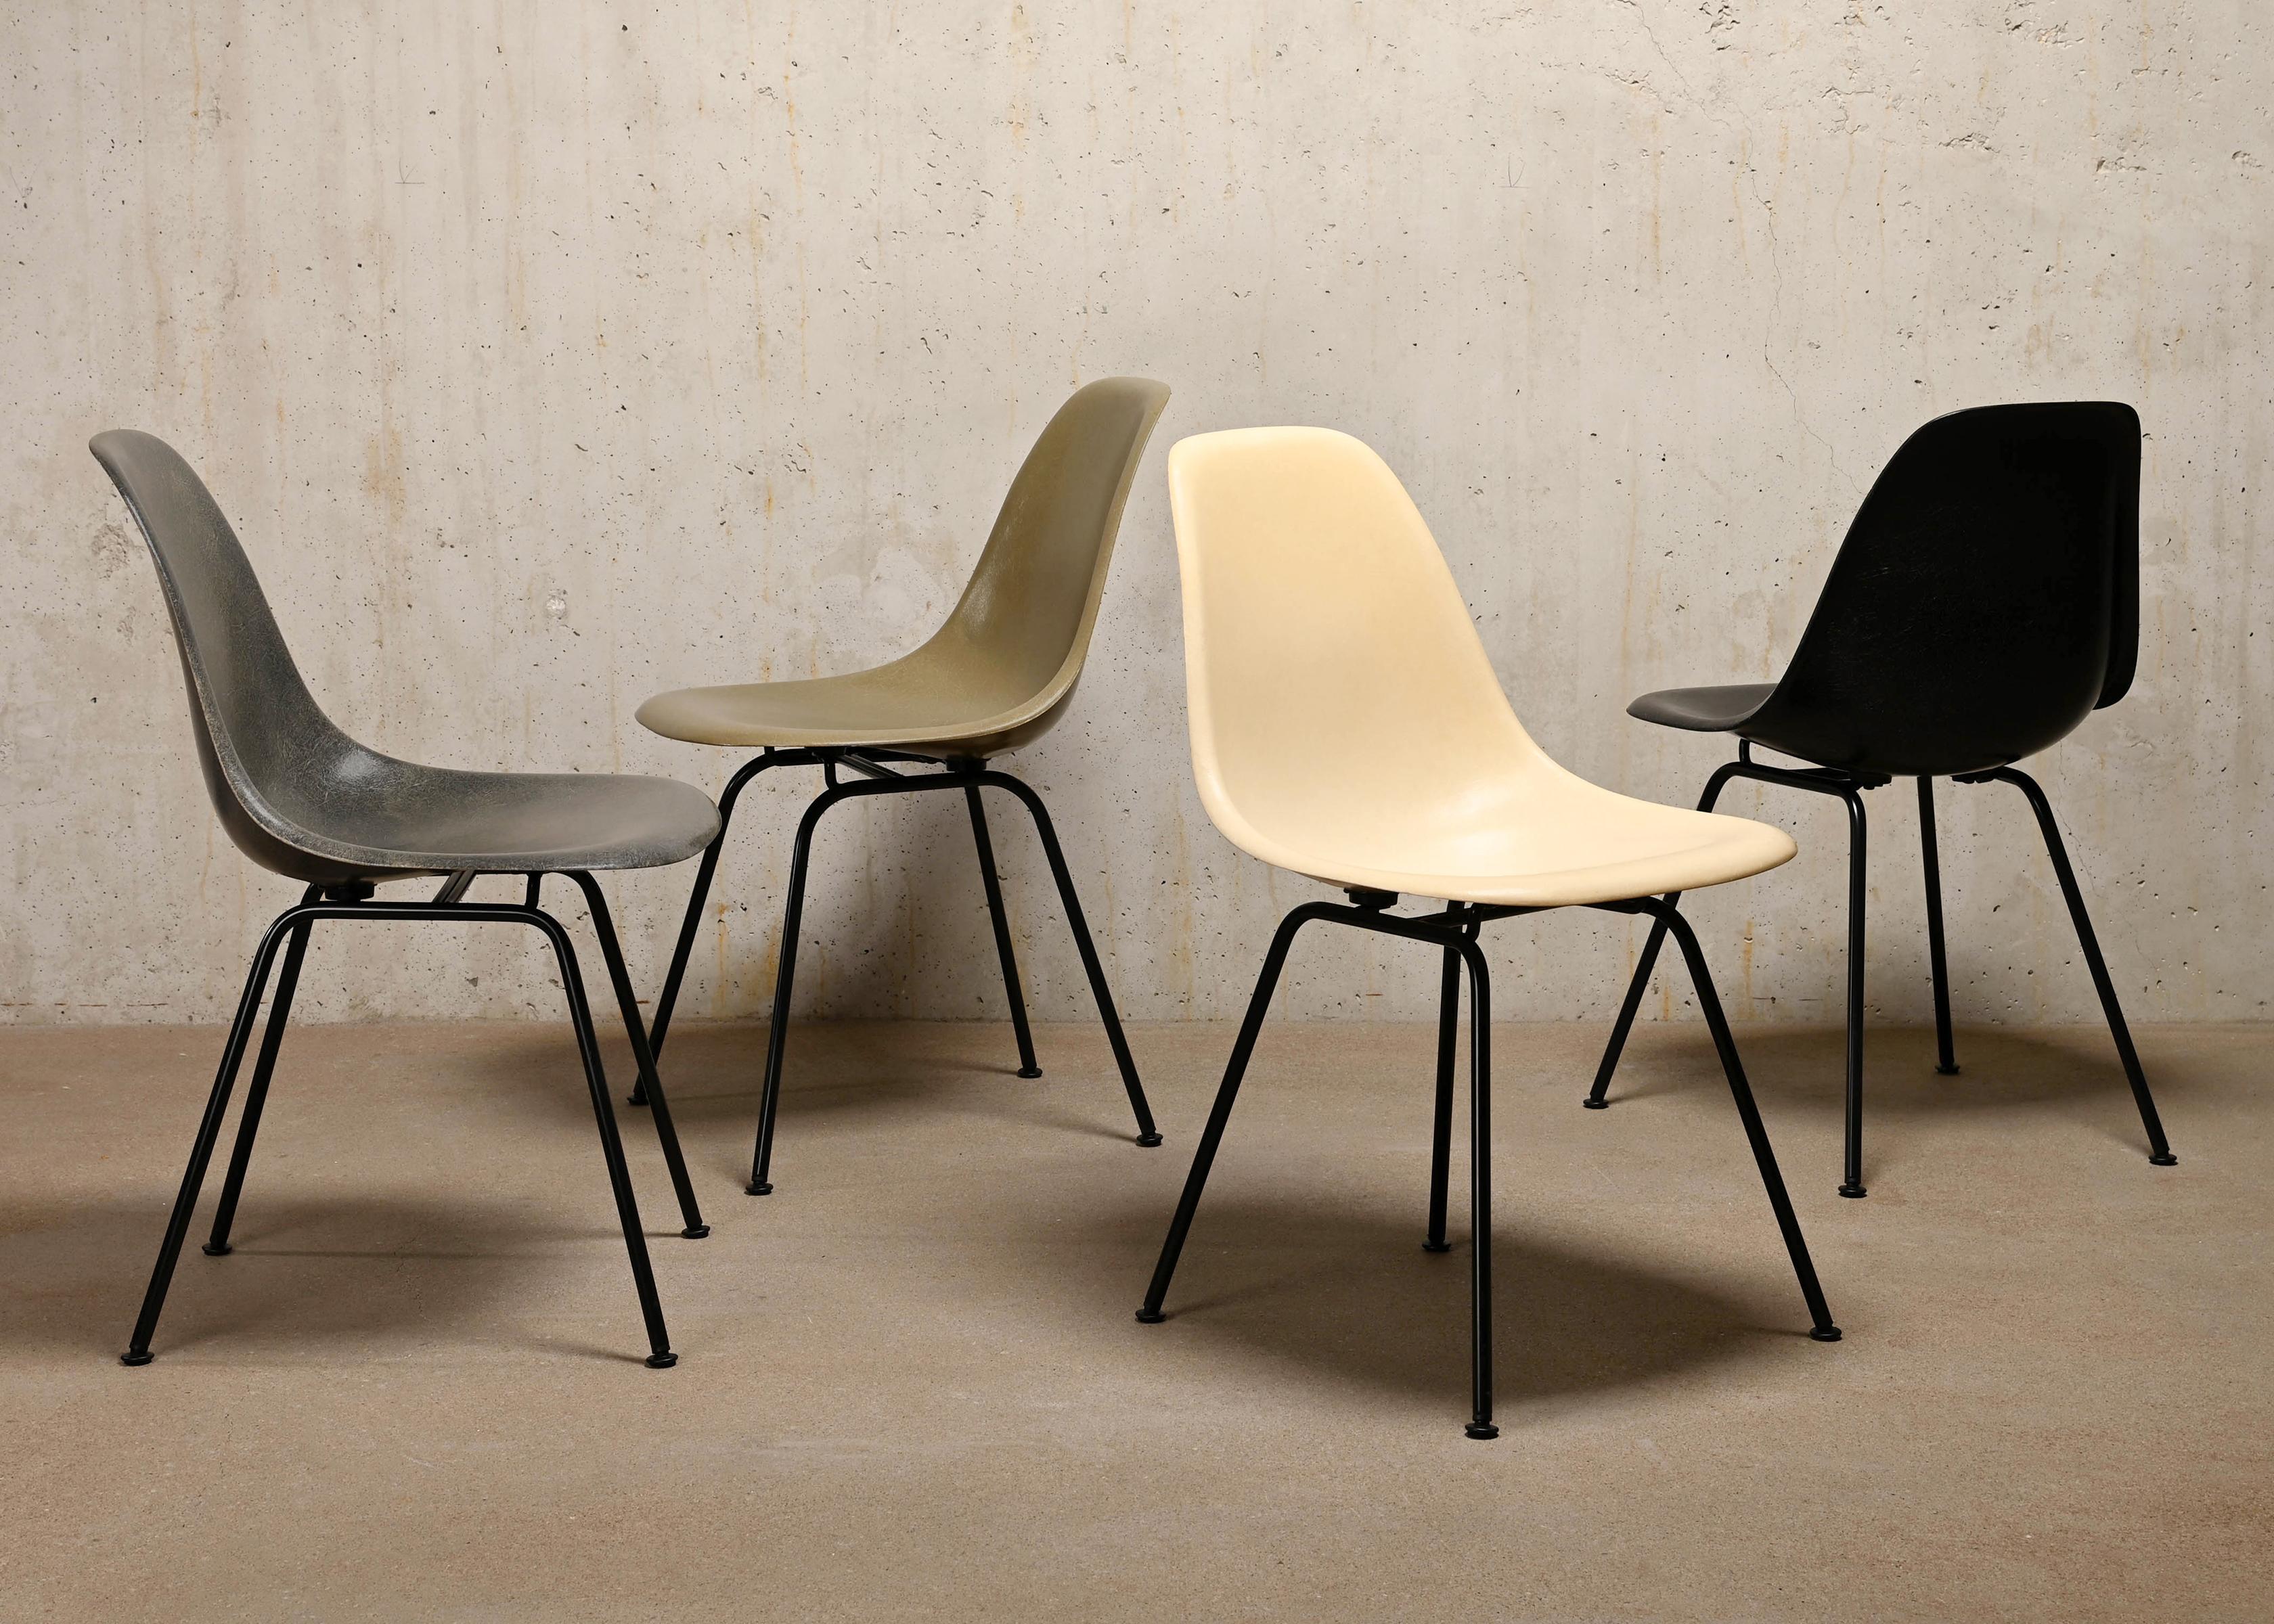 Iconic side chairs designed by Charles and Ray Eames for Herman Miller / Vitra. Molded fiberglass shells in the colours: Parchment, Raw Umber, Elephant Hide Grey and Black. Assembled on newly powder coated bases in basic dark. The chairs are in very